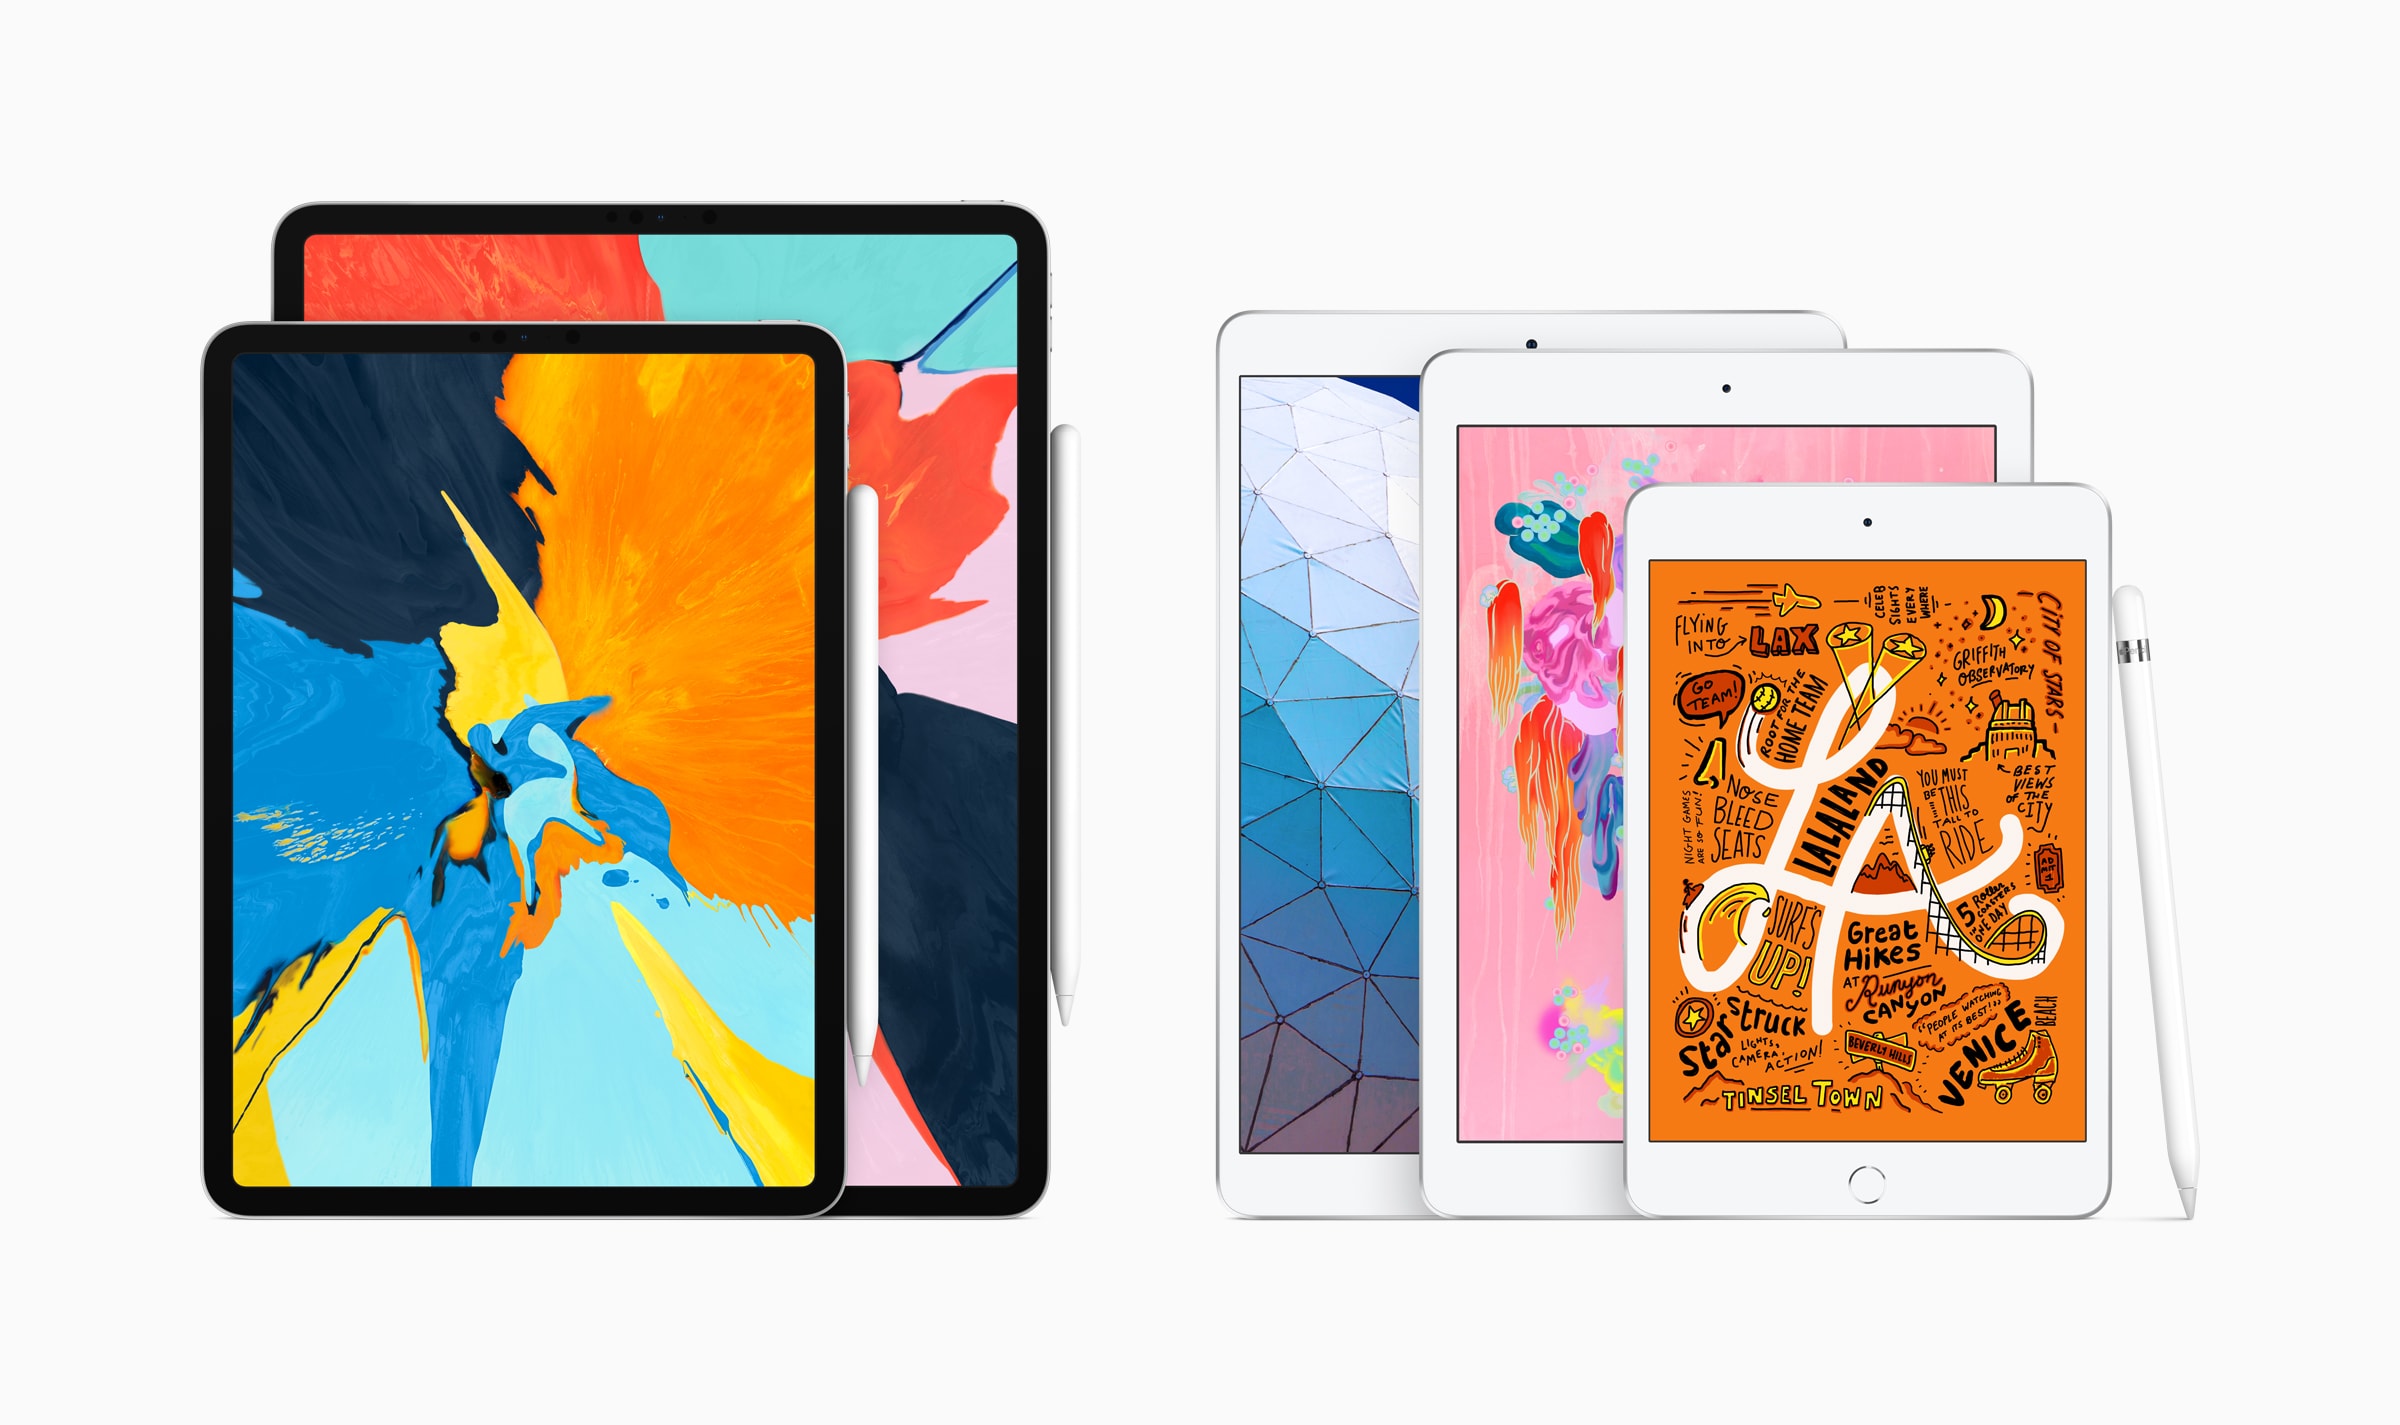 The complete iPad lineup now includes Apple Pencil support, best-in-class performance, advanced displays and all-day battery life, Apple says.